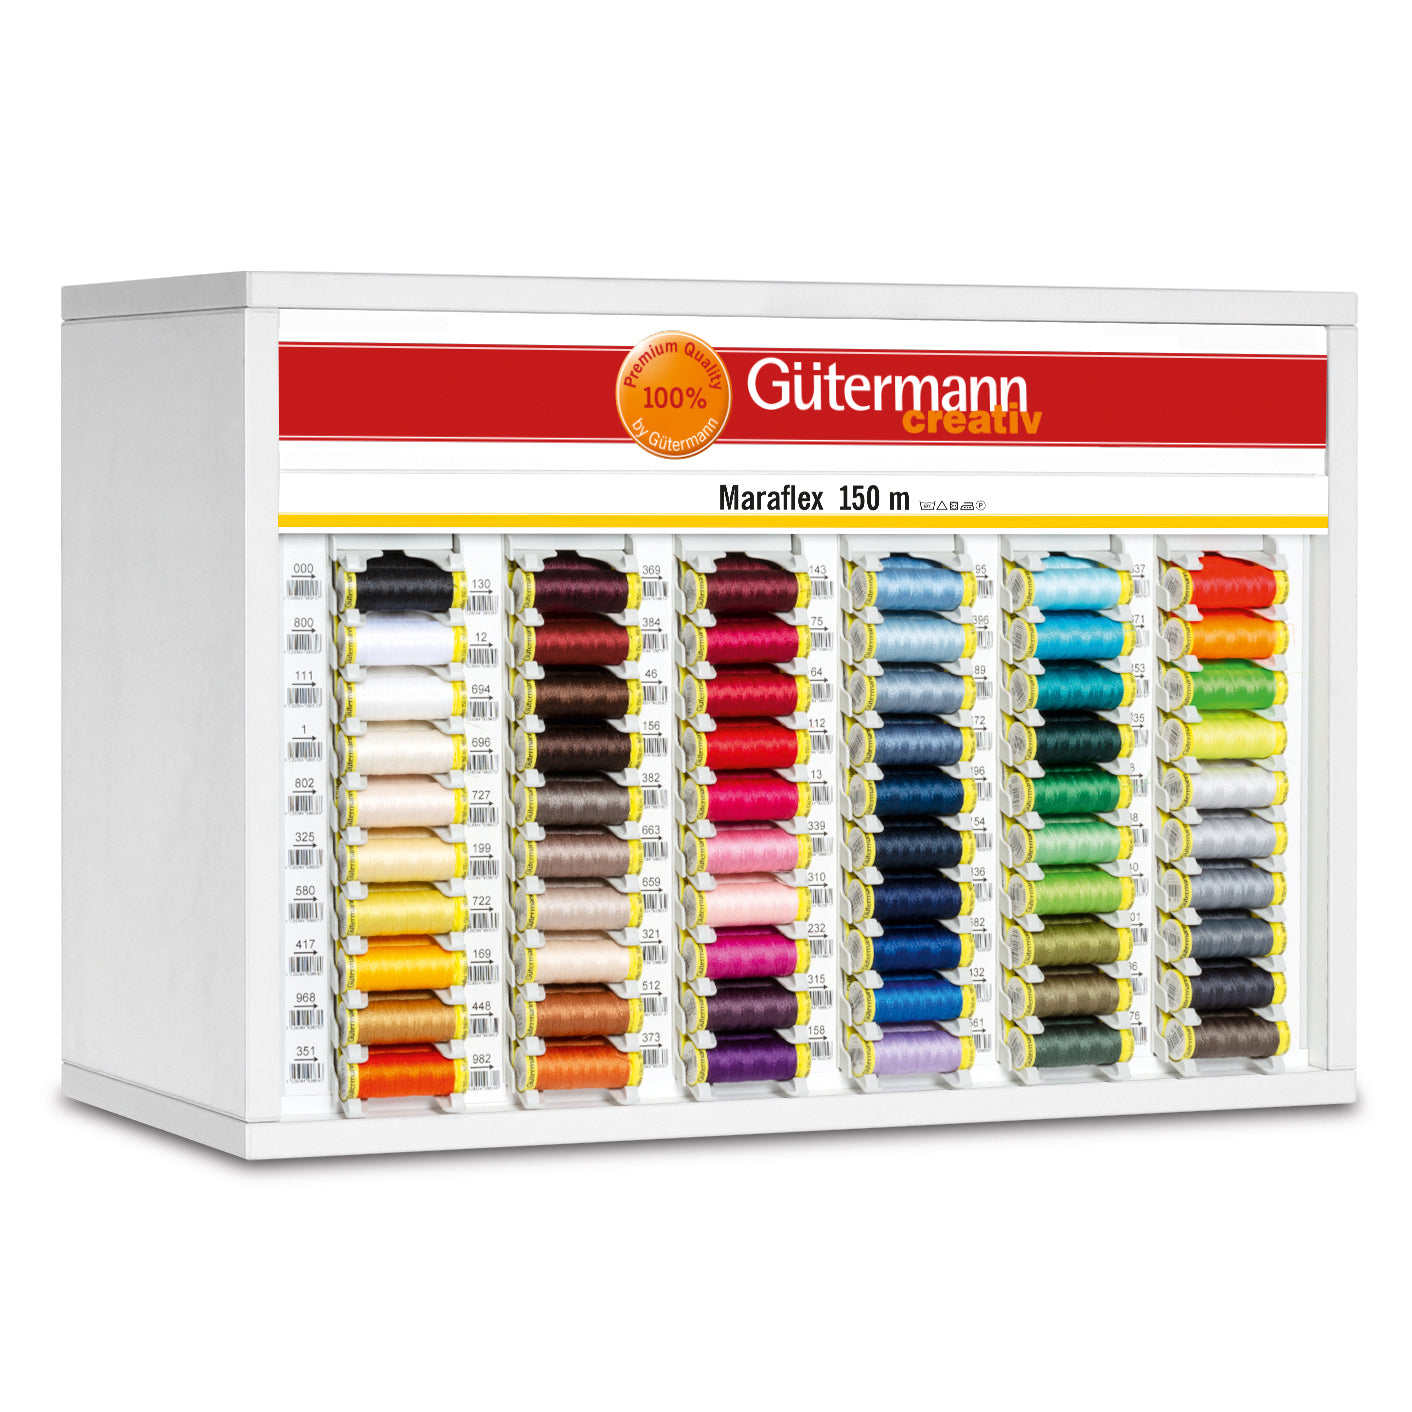 SALE! Gutermann Recycled Sewing Thread - Sew All rPET 100m - Maven